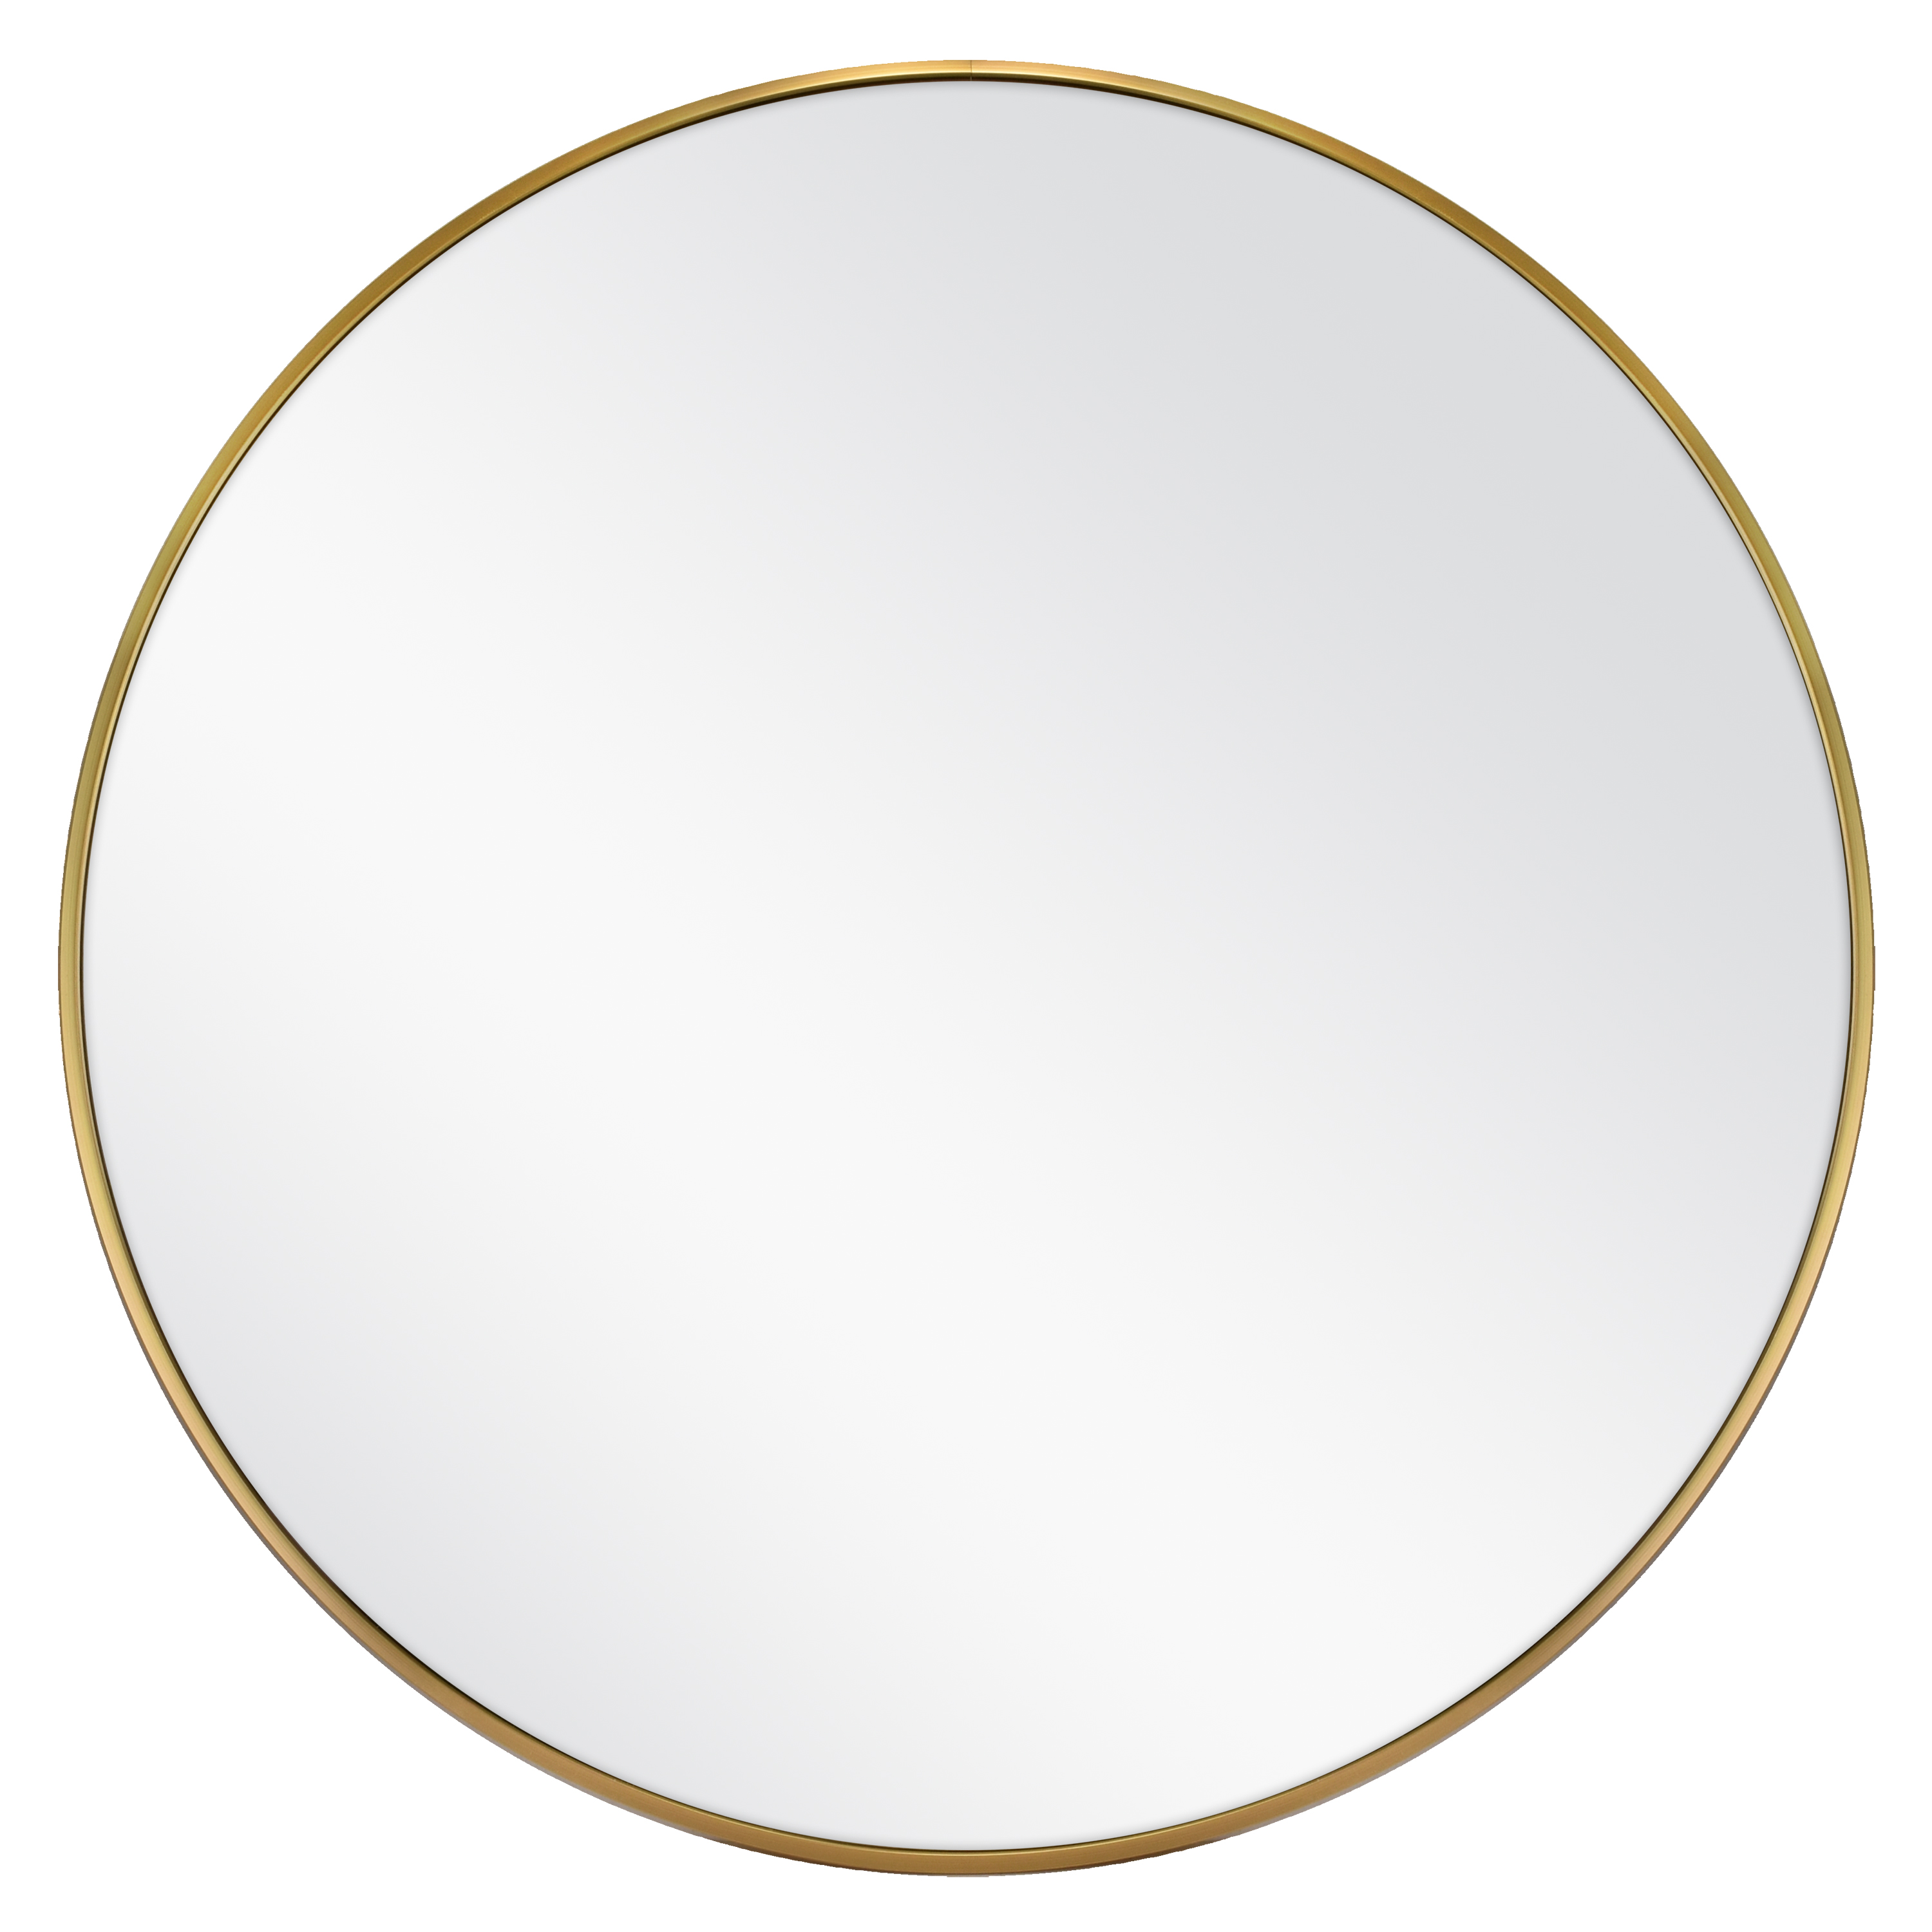 Better Homes & Gardens 28" x 28" Gold Glam, Modern and Bohemian Vanity Mirror - image 5 of 6